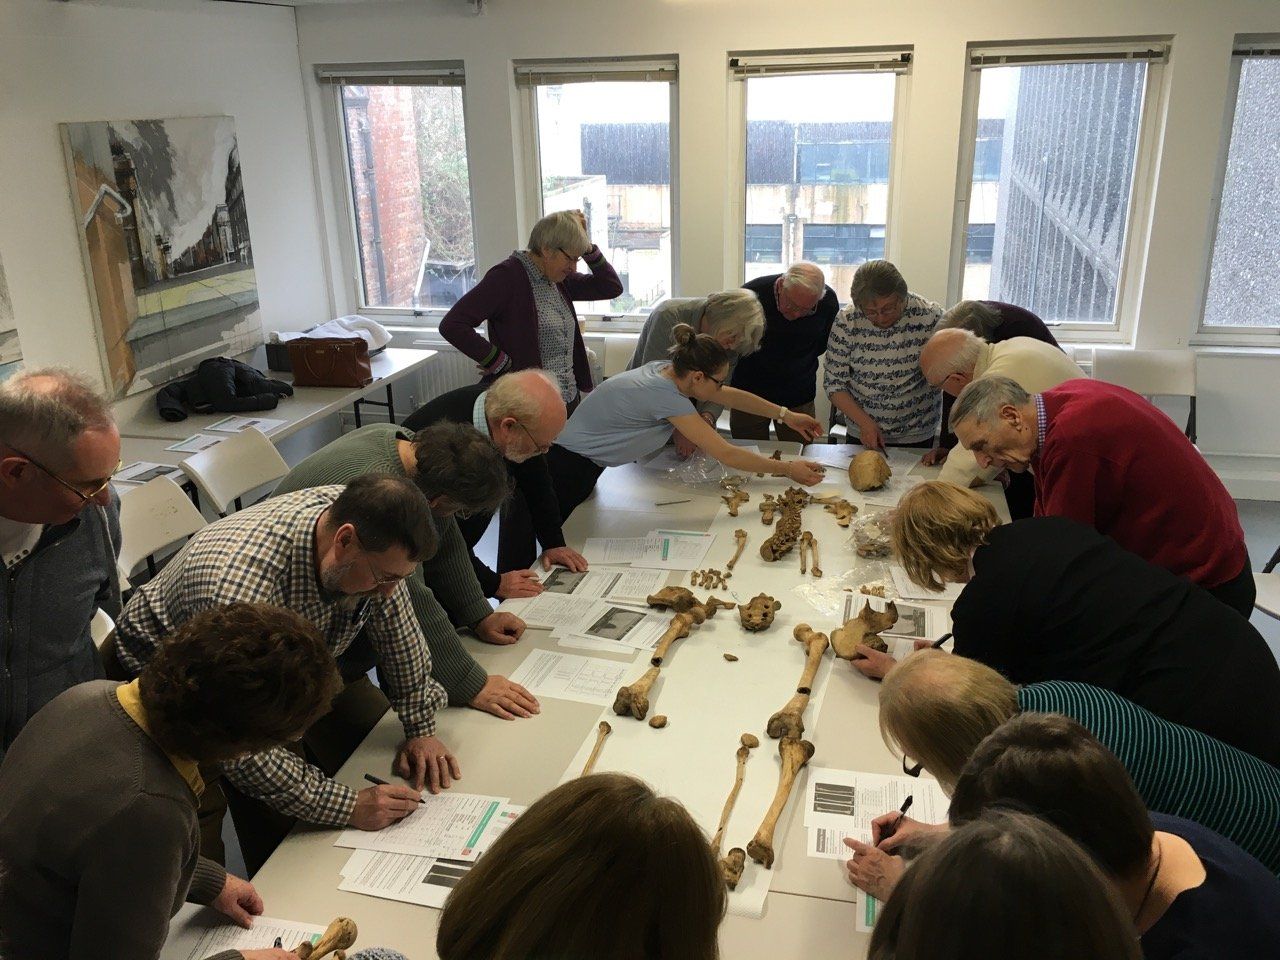 Explore lifelong learning 2016 forensic anthropology adult education